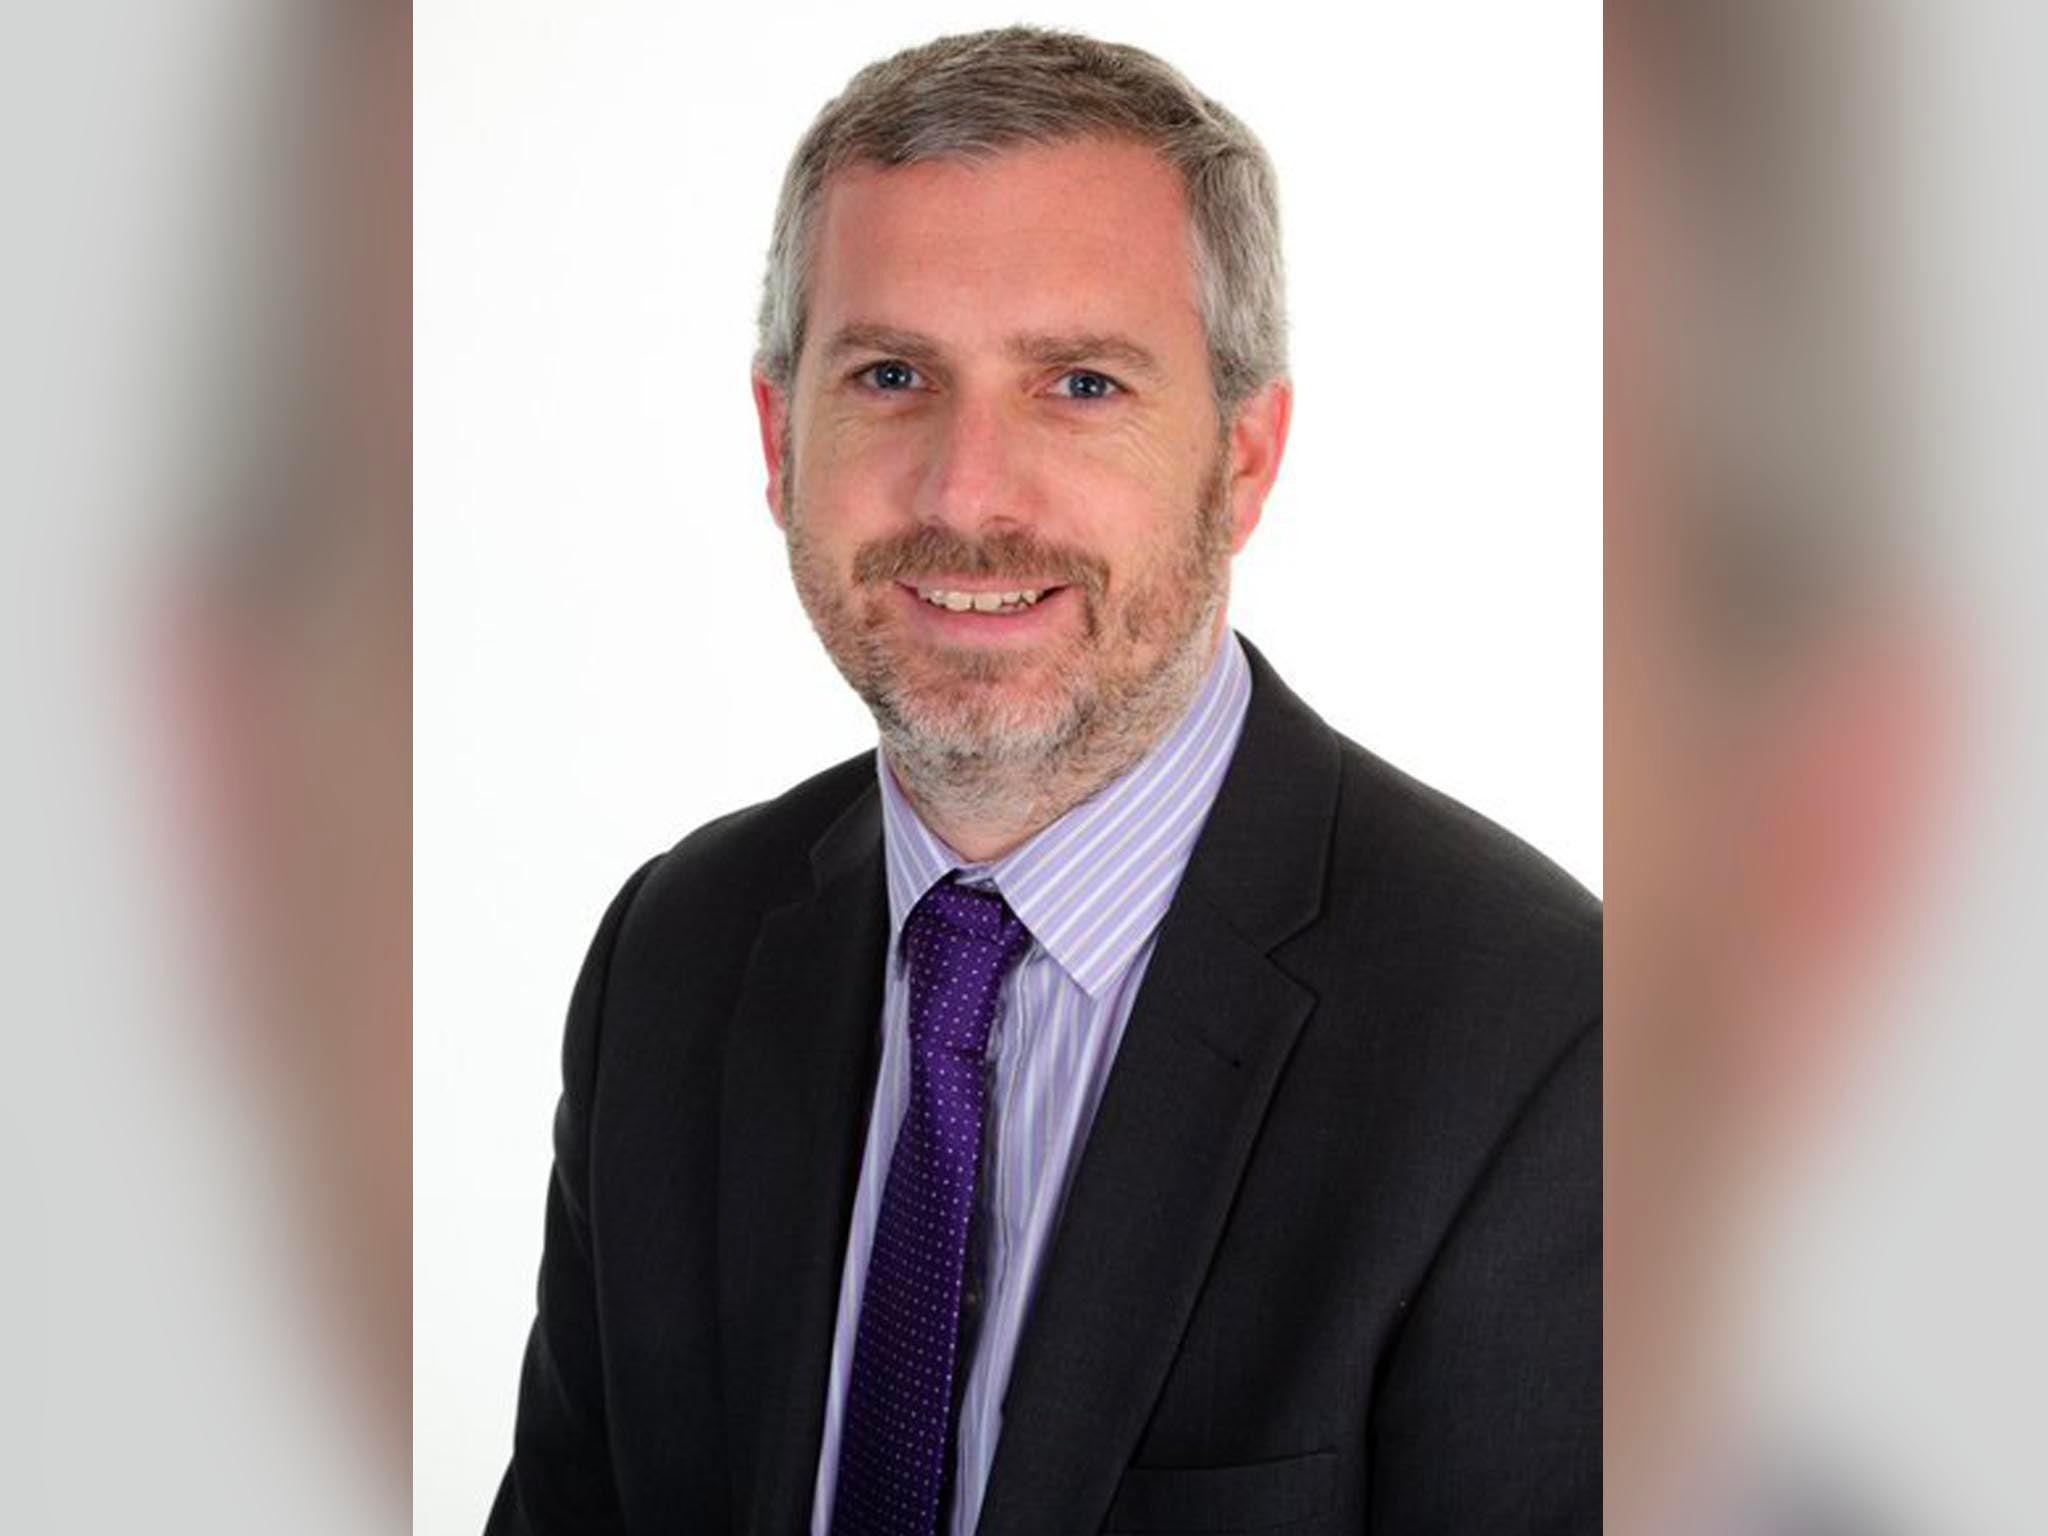 Headteacher Michael Tidd says he has been covering classes himself to cut down on supply costs